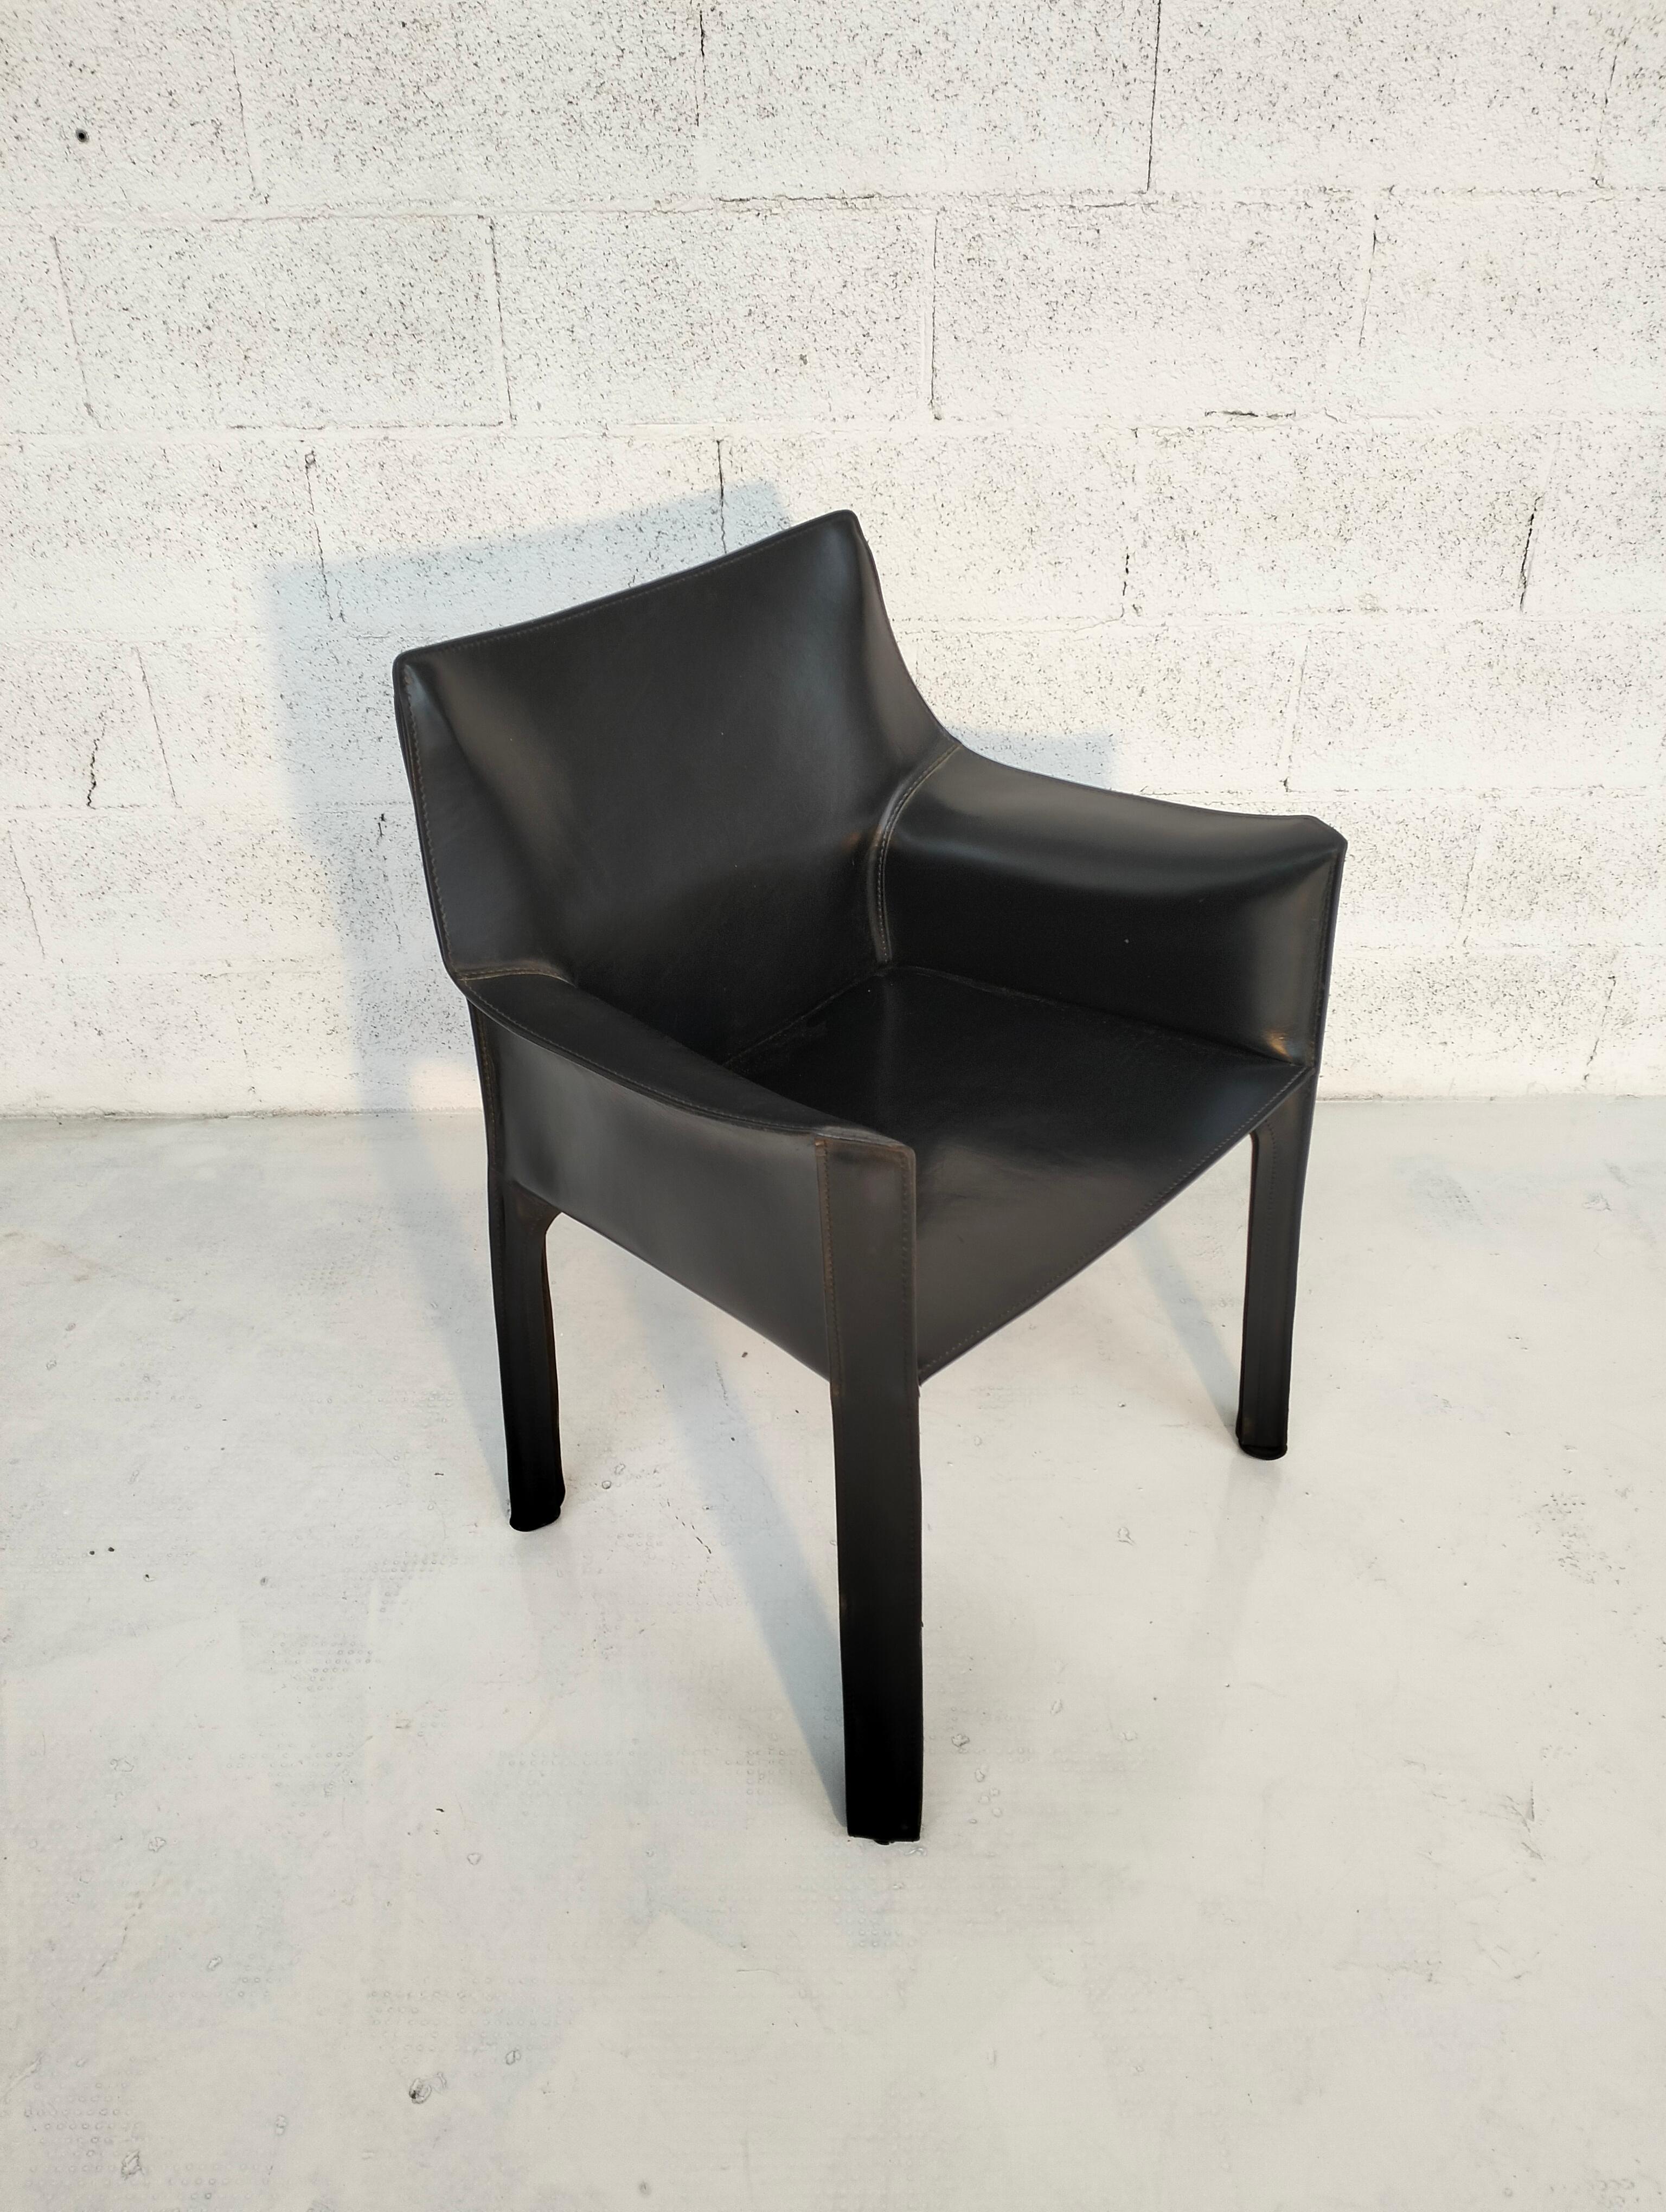 Mid-Century Modern Cab 413 black leather armchair by Mario Bellini for Cassina, Italy, 70's